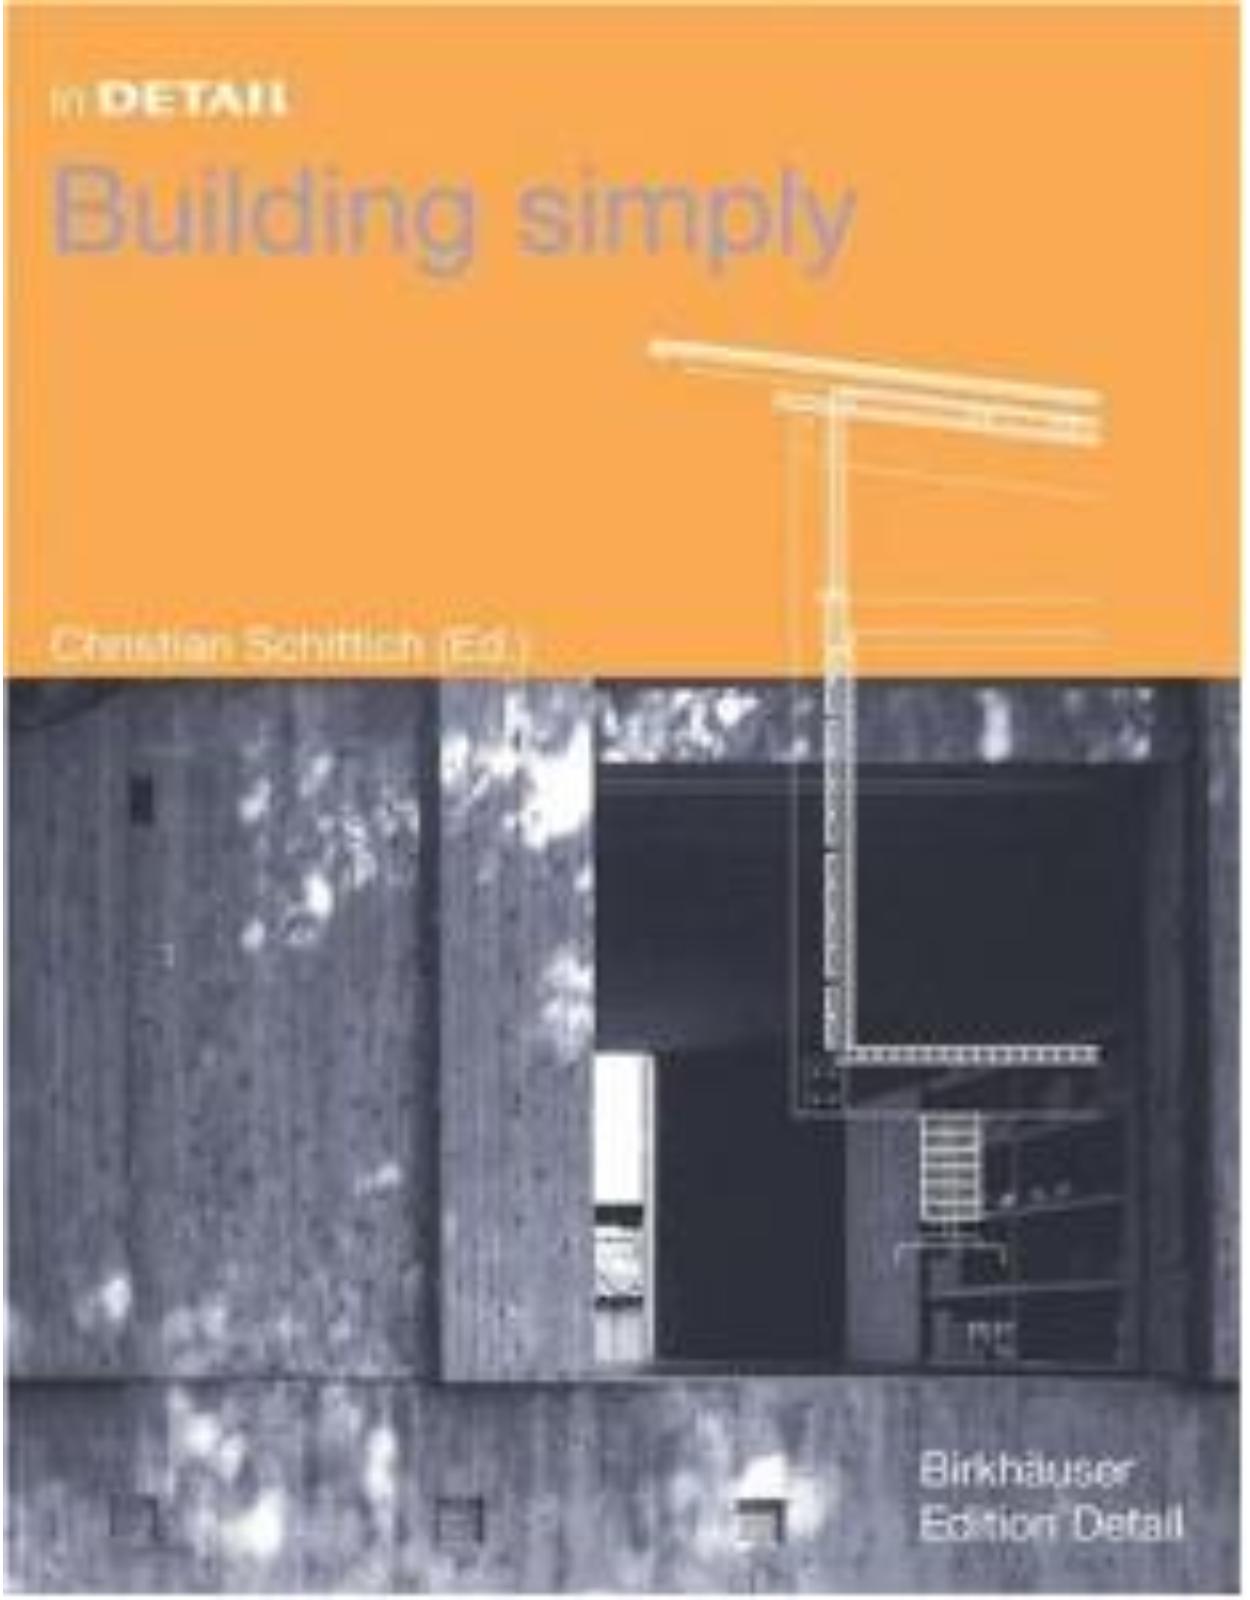 In Detail: Building Simply